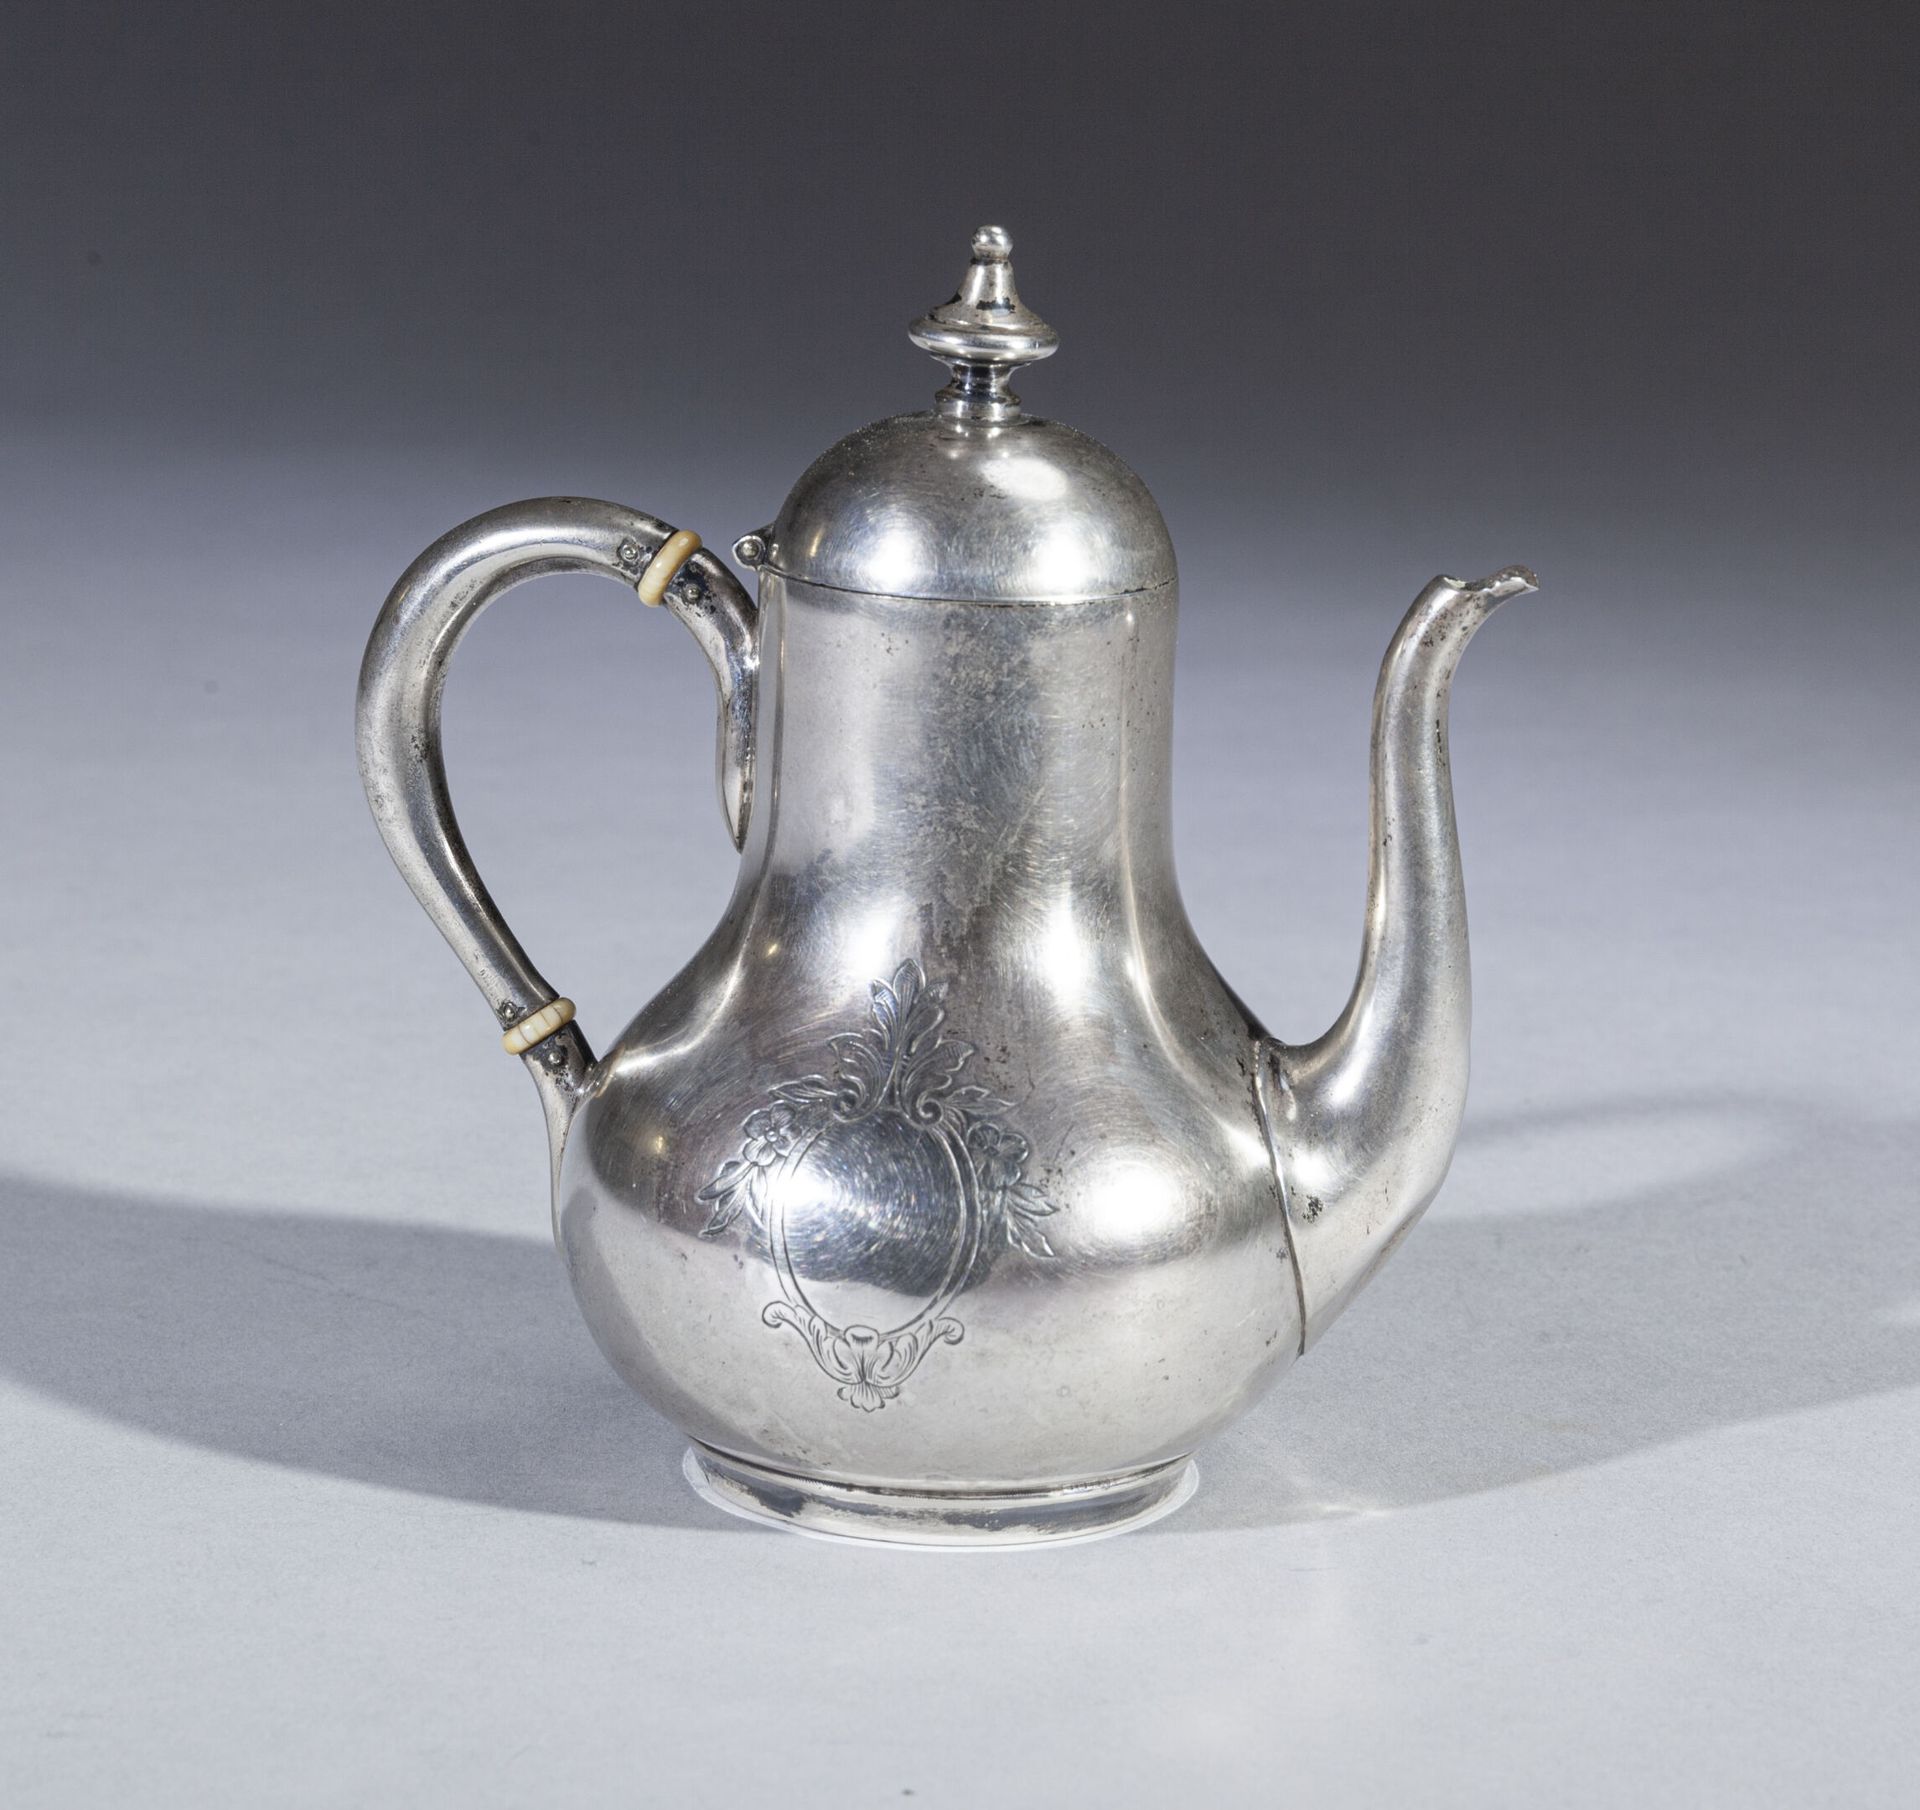 Null Selfish coffee pot "à la turque" in plain silver, engraved with a blind lea&hellip;